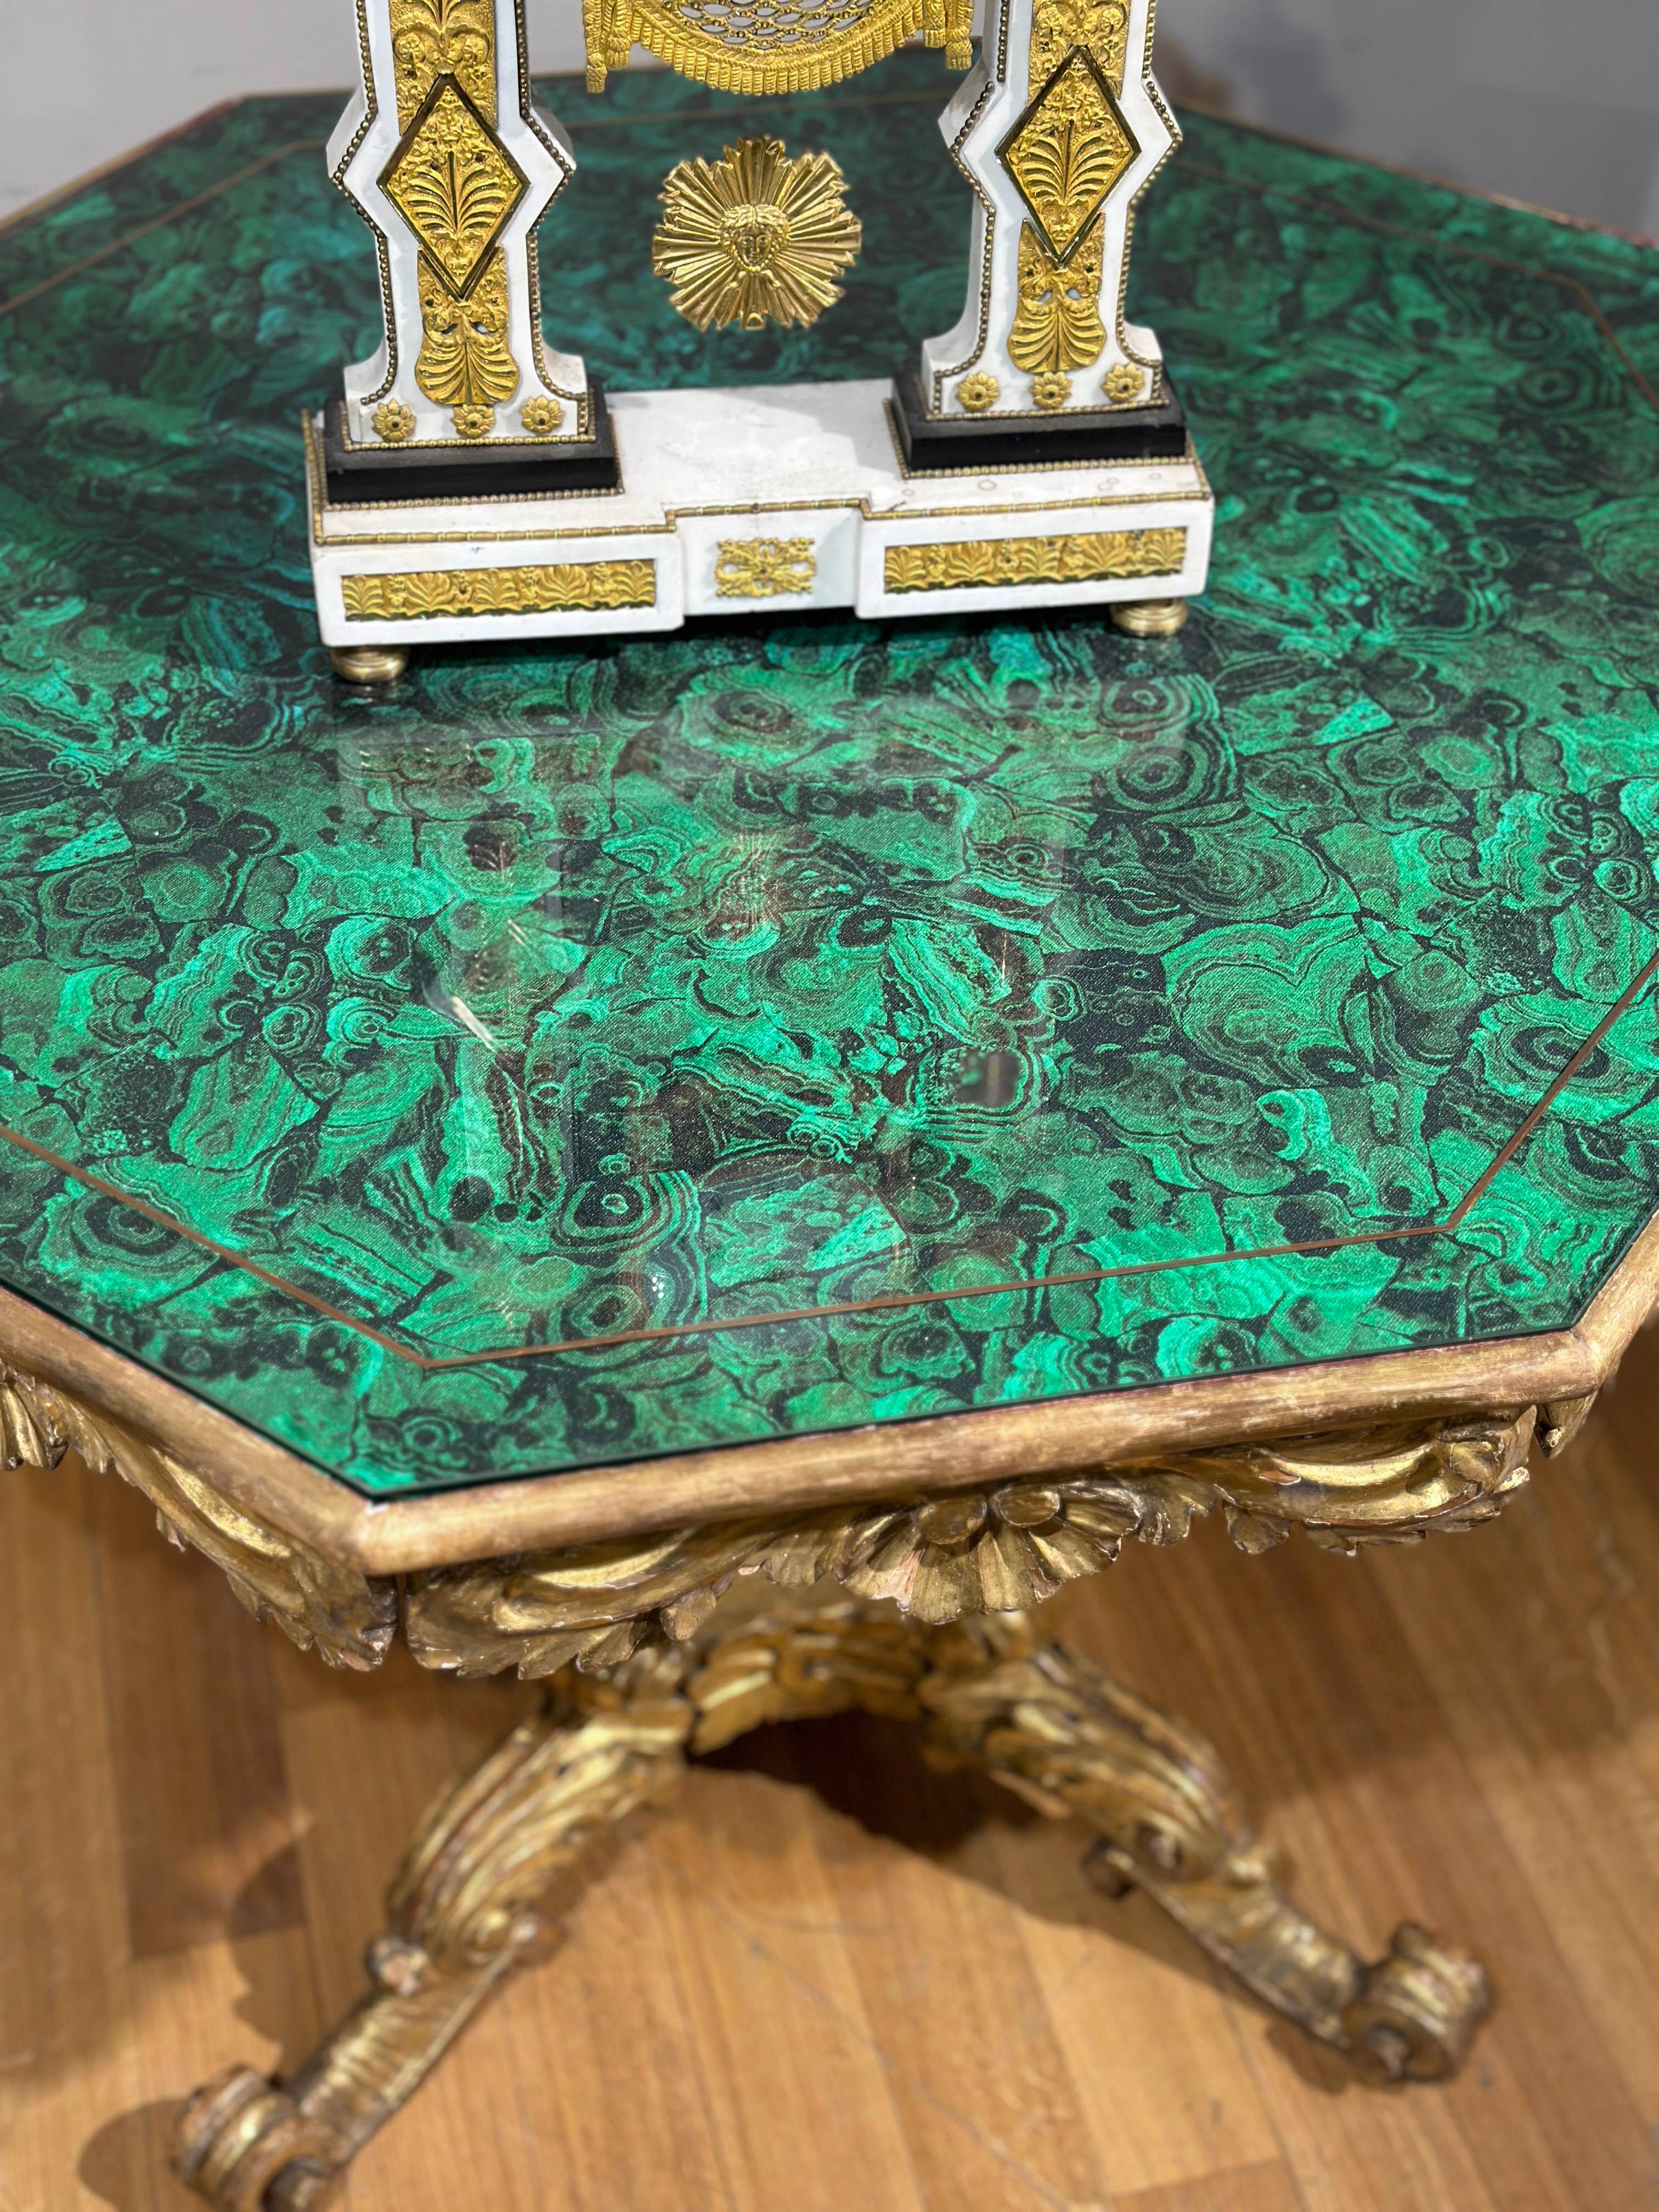 EARLY 19th CENTURY GILDED WOOD TABLE WITH SIMILAR MALACHITE FABRIC im Angebot 5